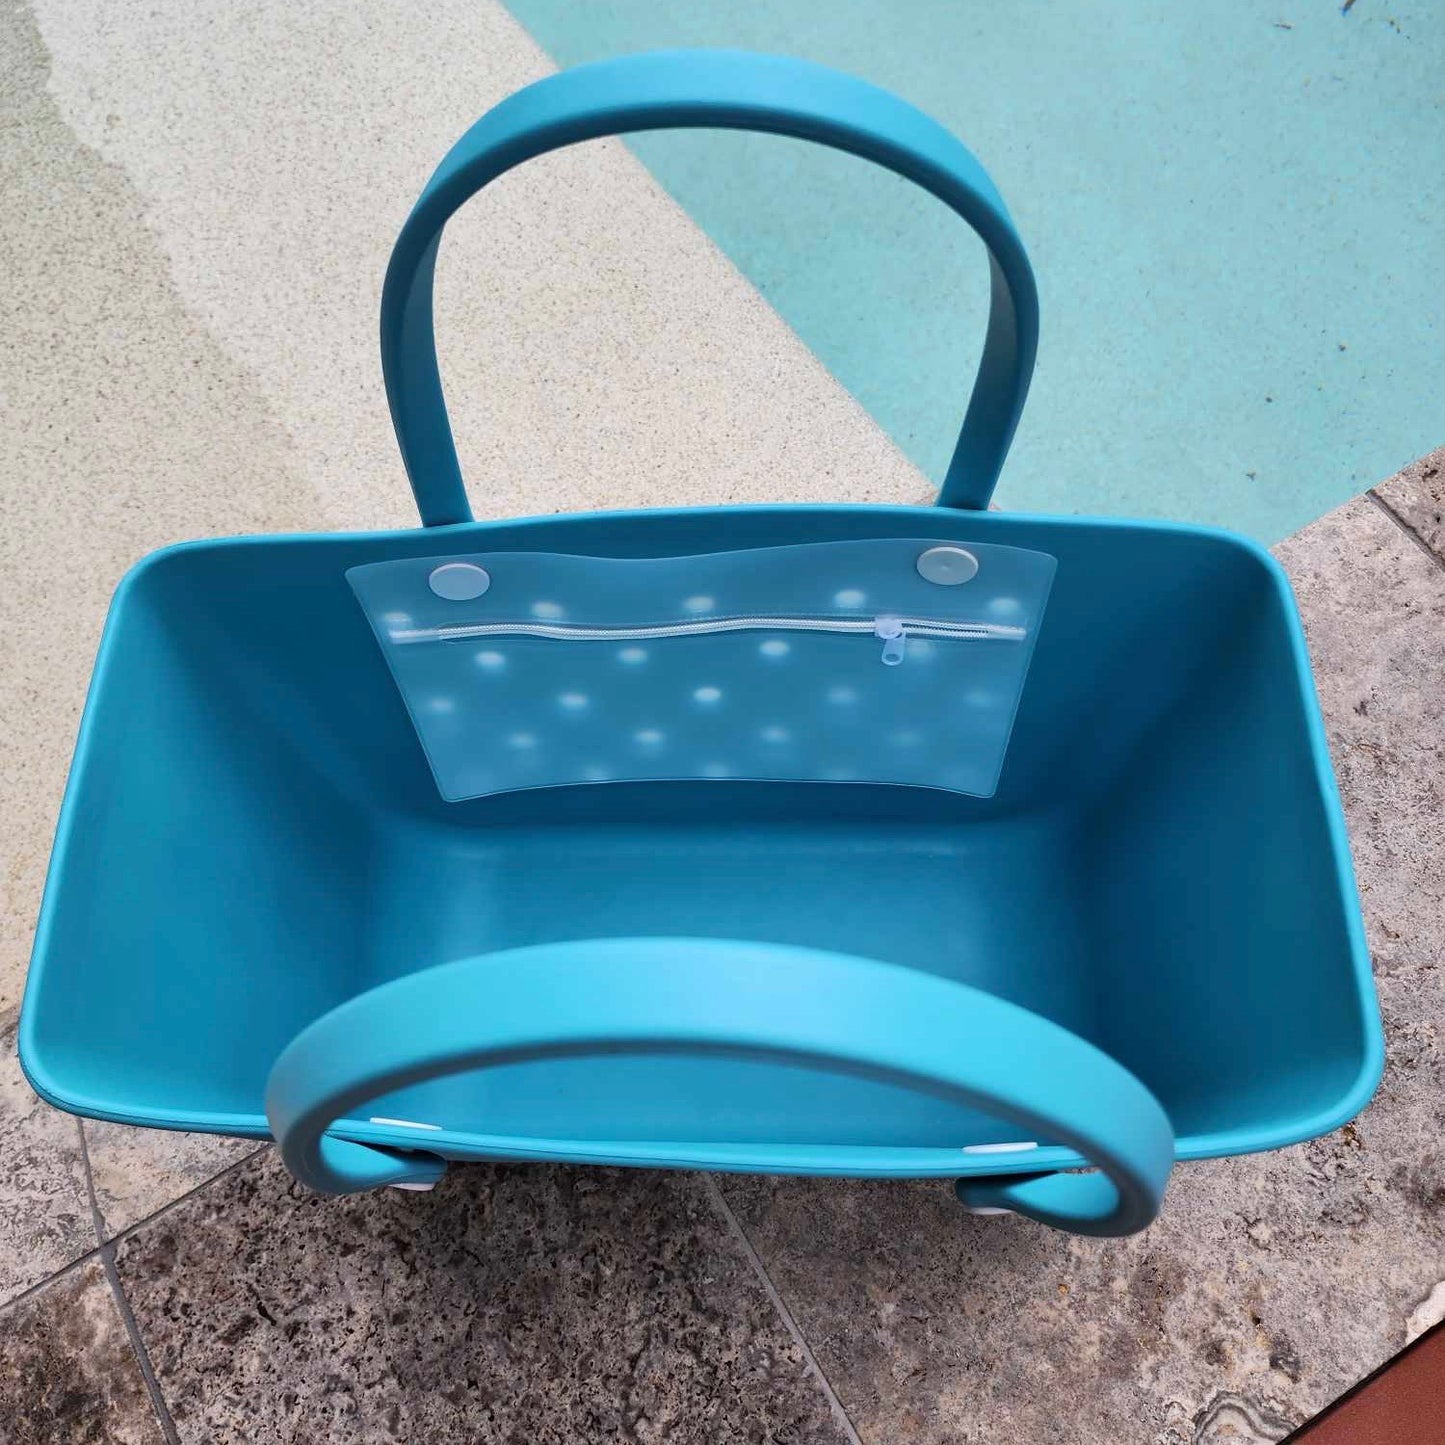 Aqua Marine Silicone Bag (One Size Fits All): Stylish & Functional for Beach Days. [Durable aqua marine silicone bag with a convenient side pocket sits open, ready to be filled with beach essentials.]